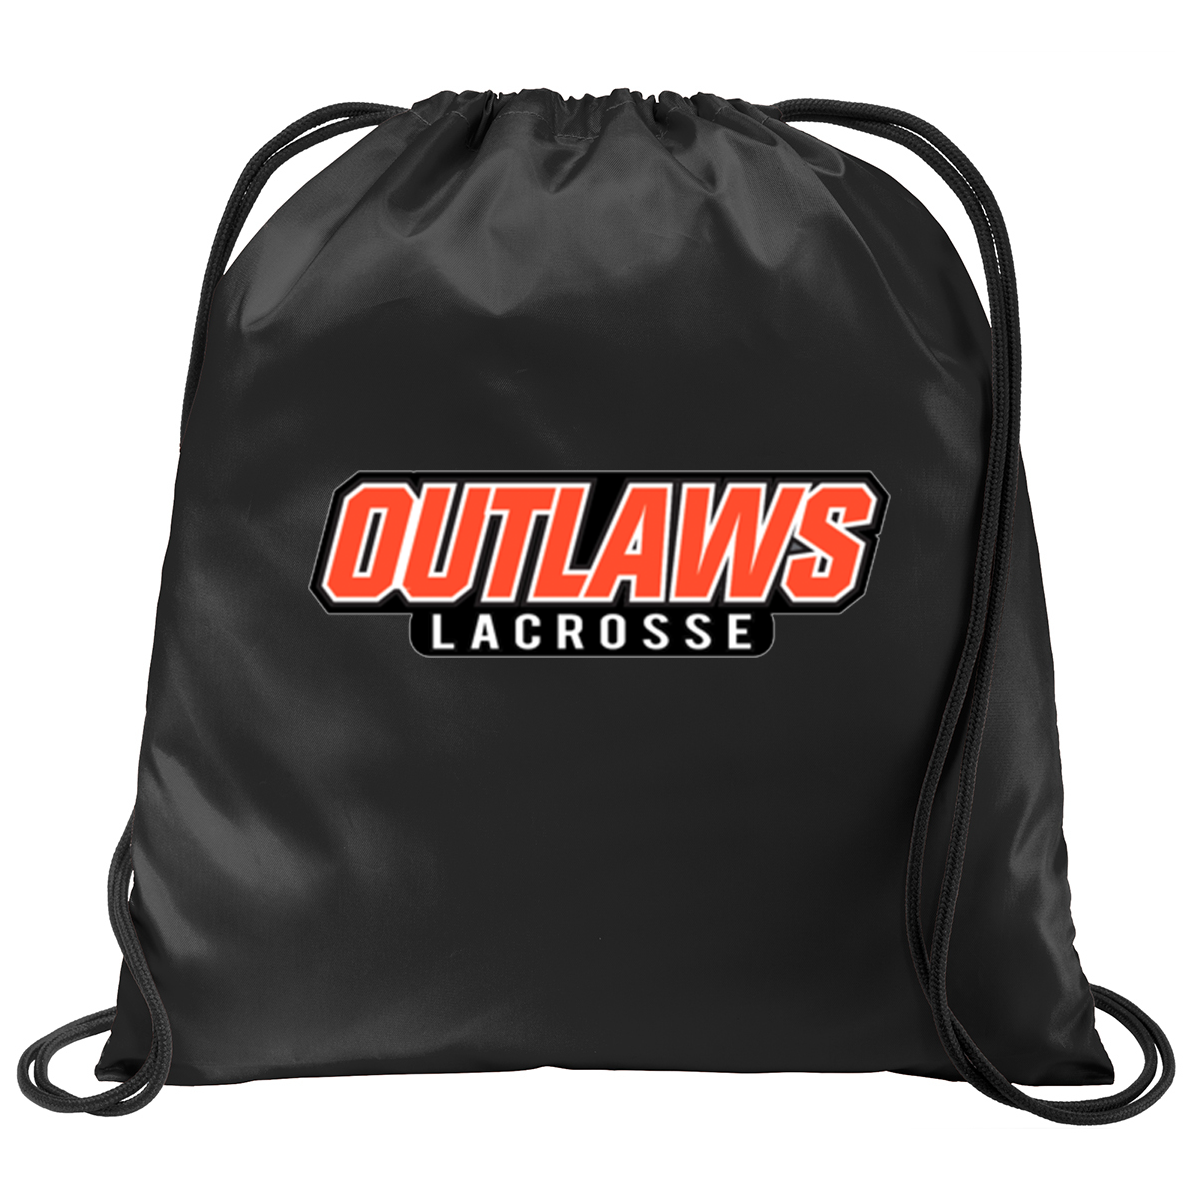 Outlaws Lacrosse Cinch Pack